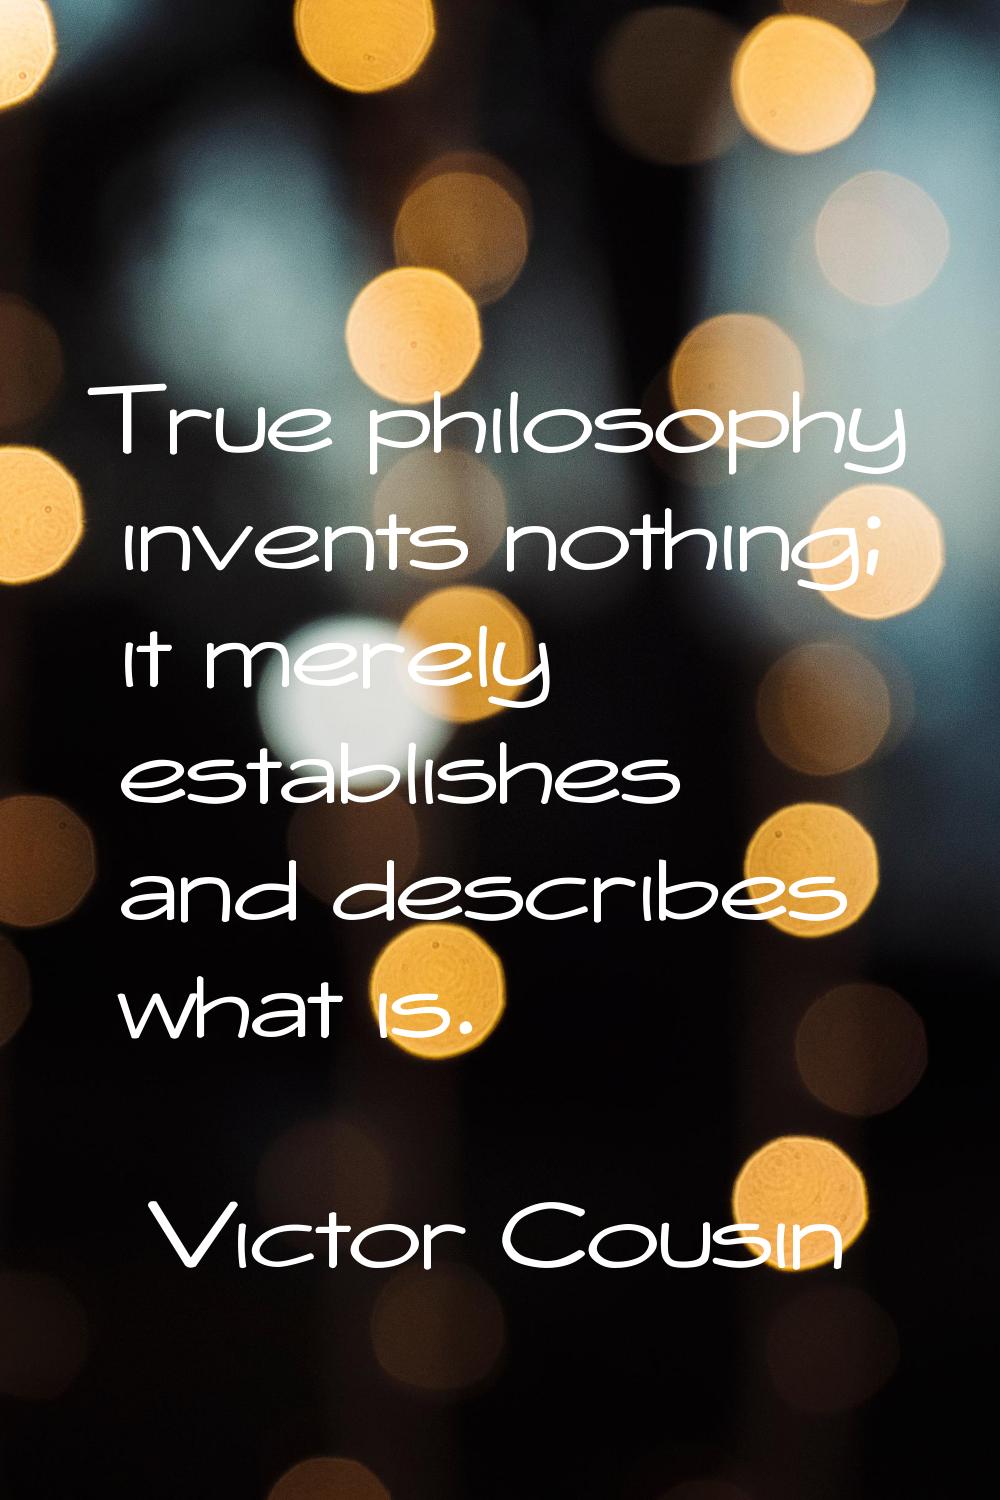 True philosophy invents nothing; it merely establishes and describes what is.